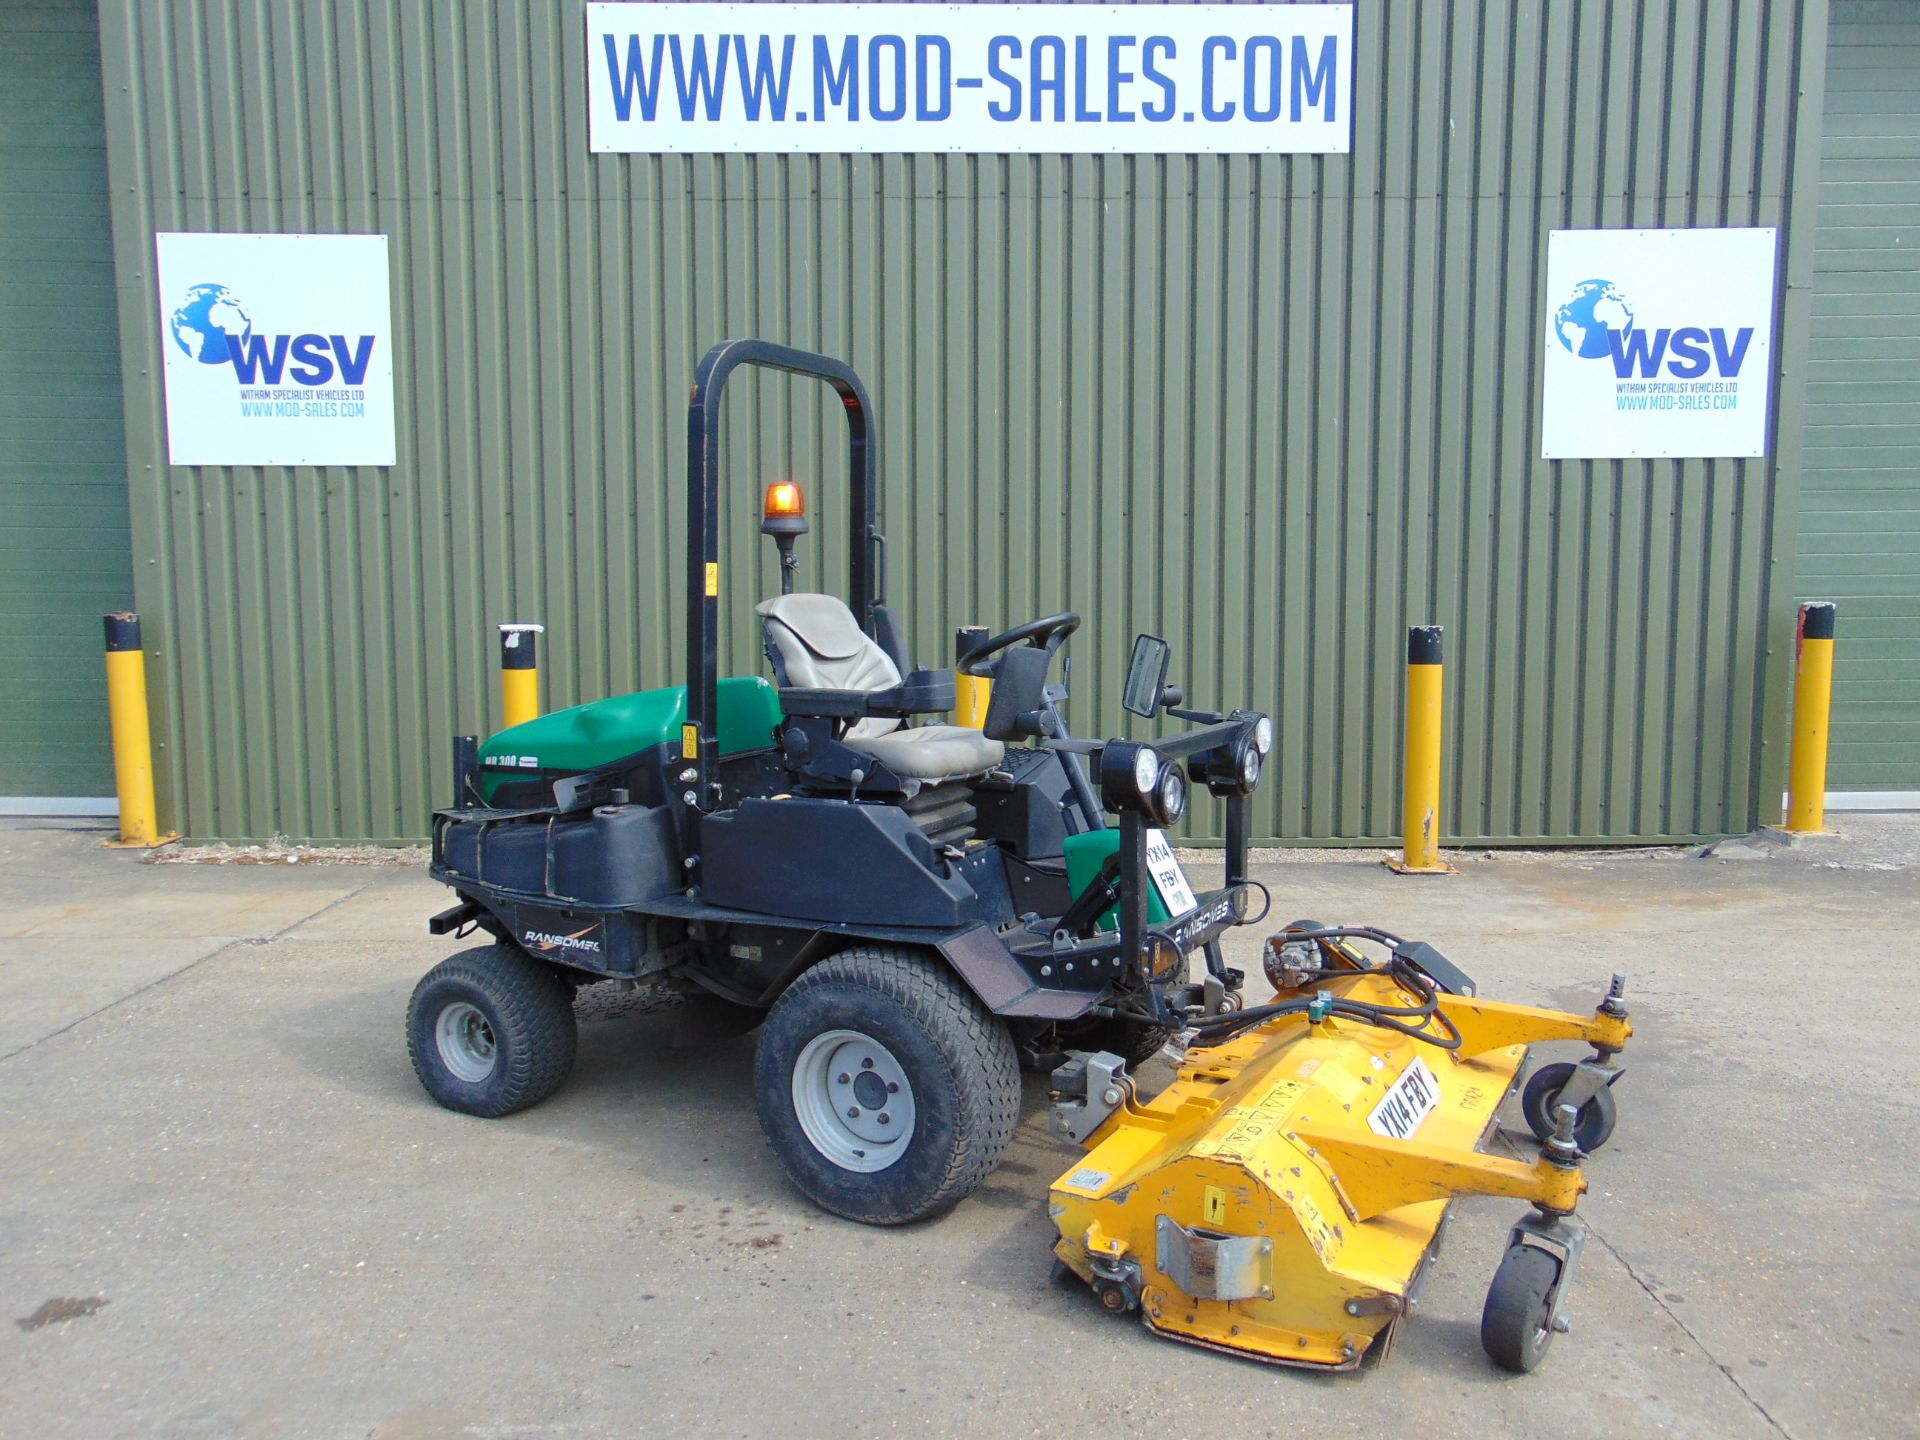 2014 Ransomes HR300 C/W Muthing Outfront Flail Mower ONLY 3,489 Hours!